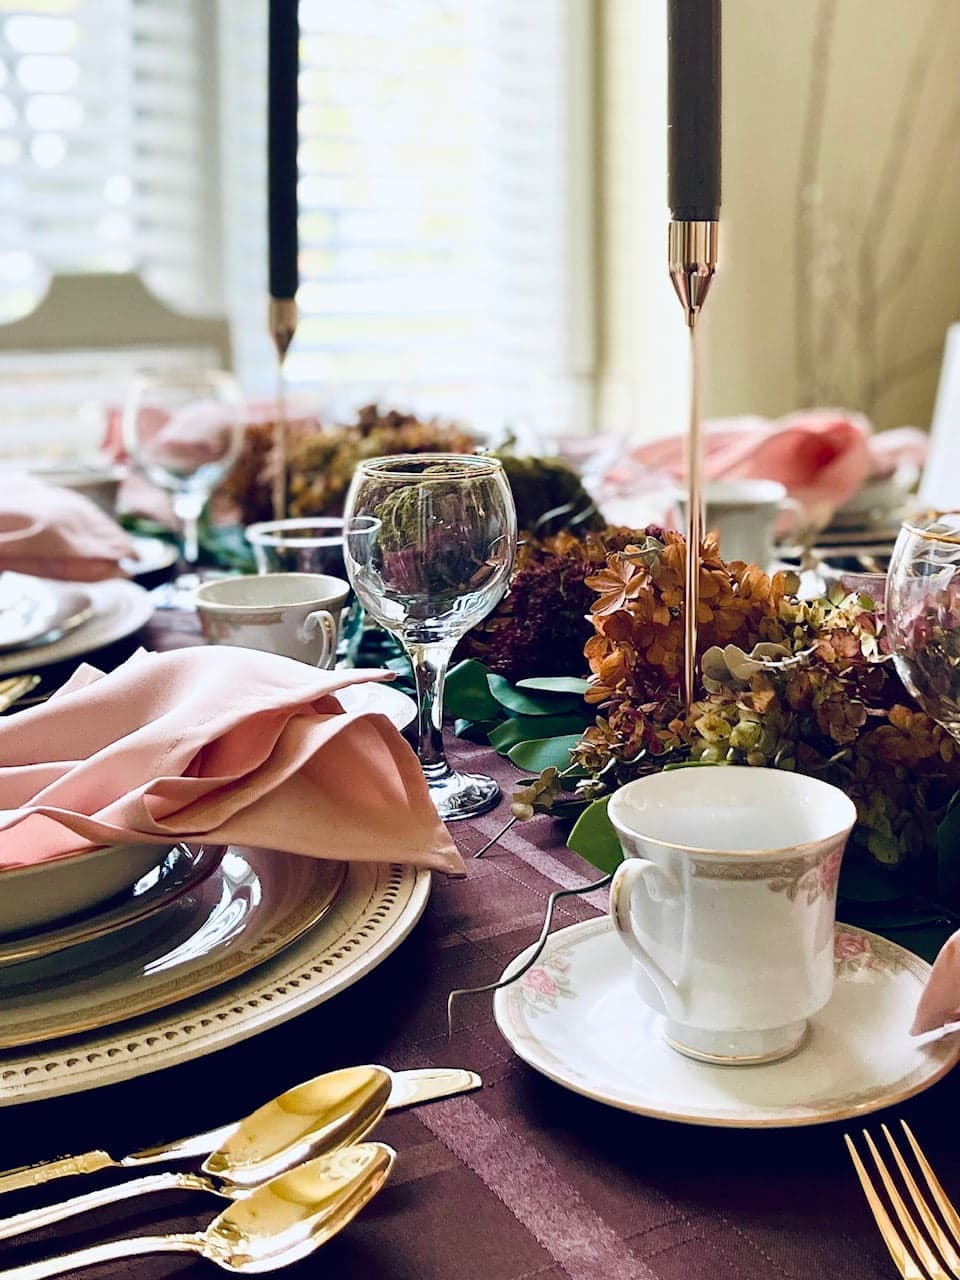 9 Budget Fall Decorating Ideas For Your Table Scape - House of Mar